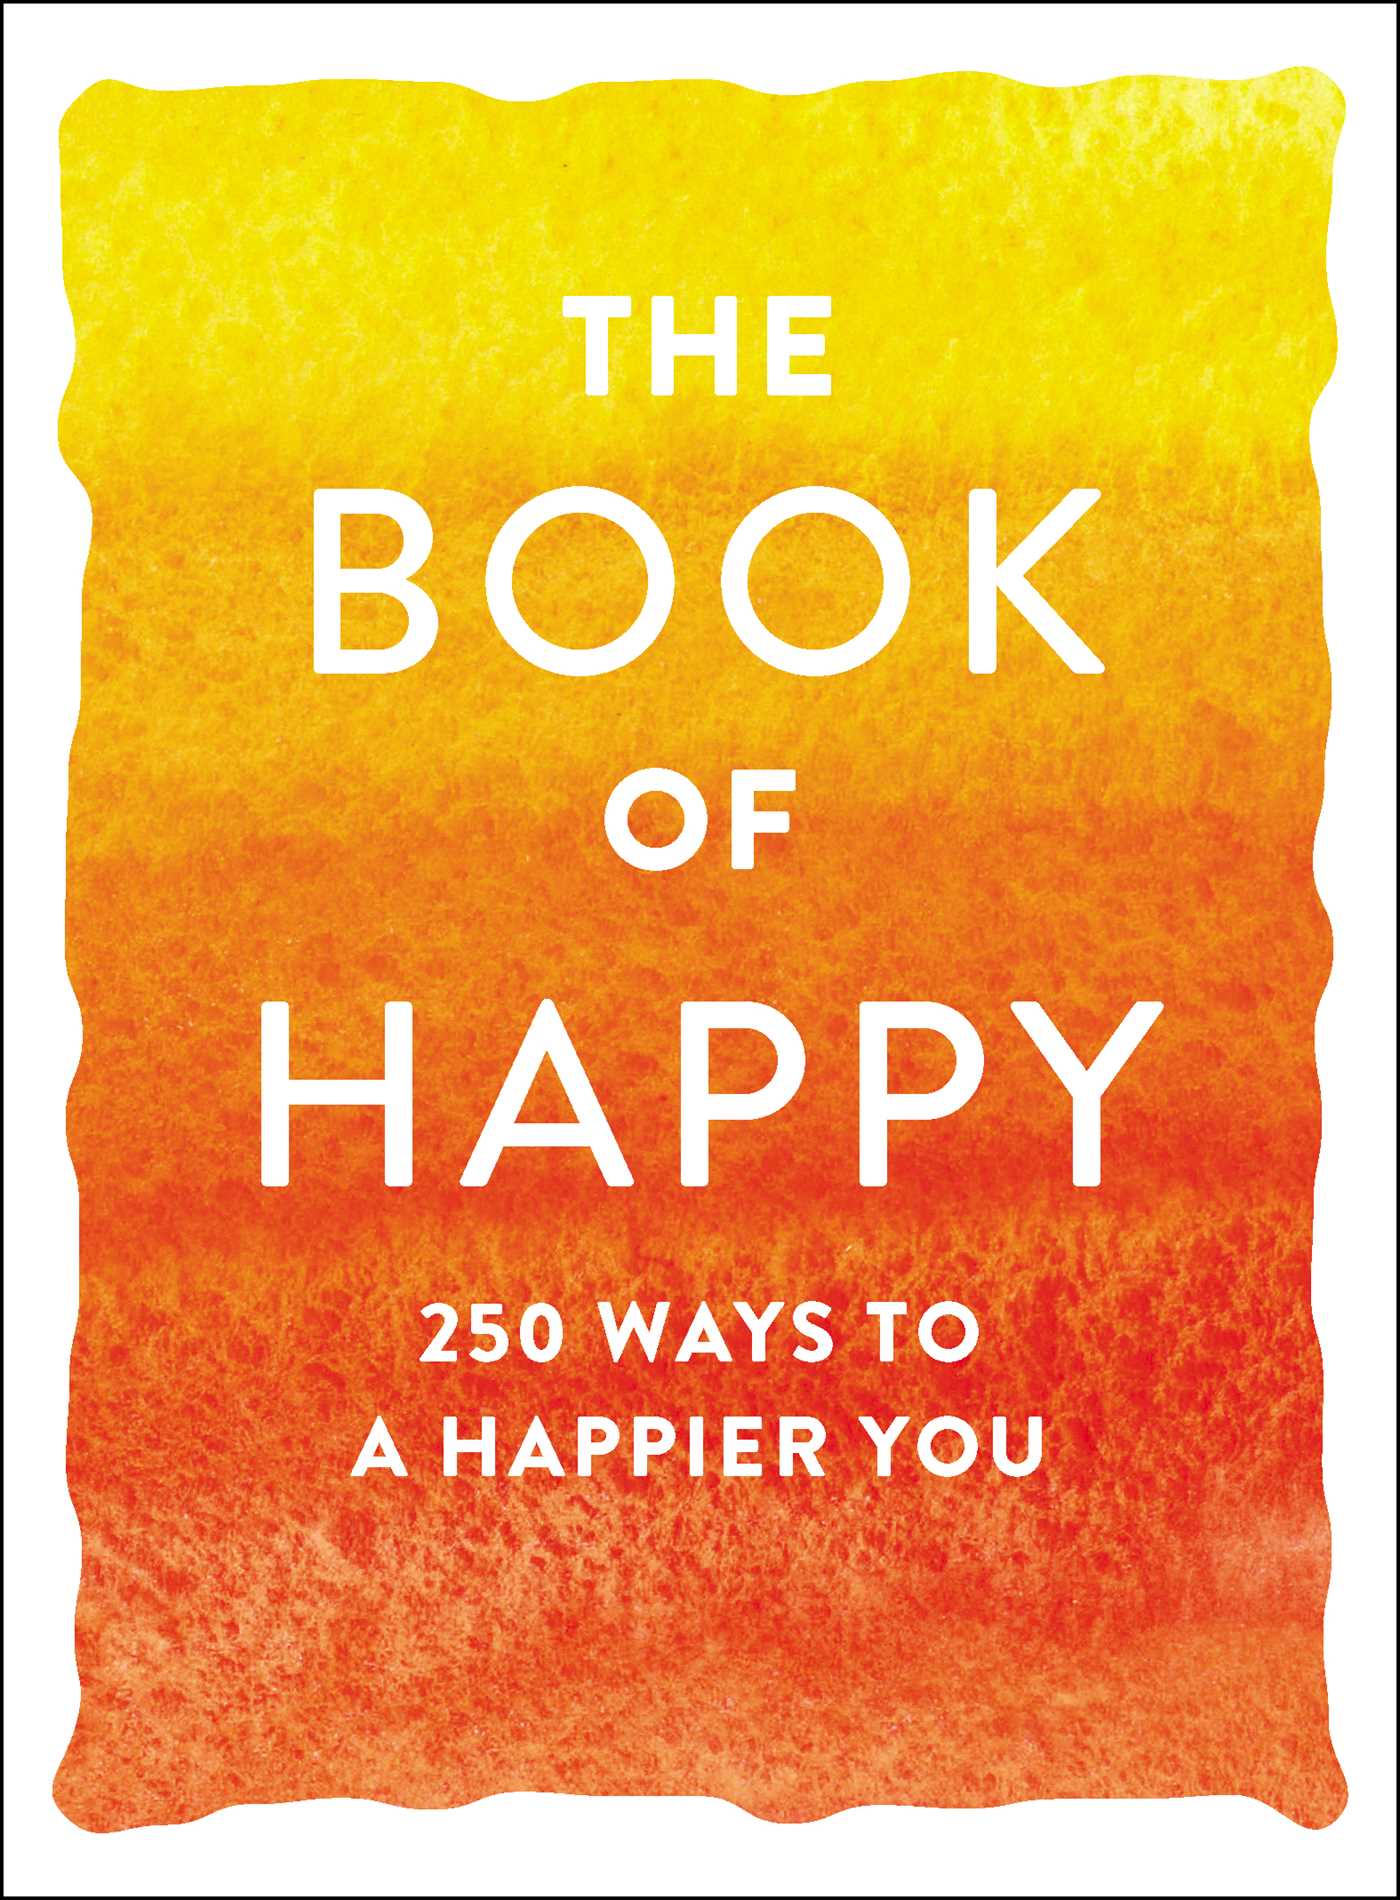 The Book of Happy : 250 Ways to a Happier You | Psychology & Self-Improvement